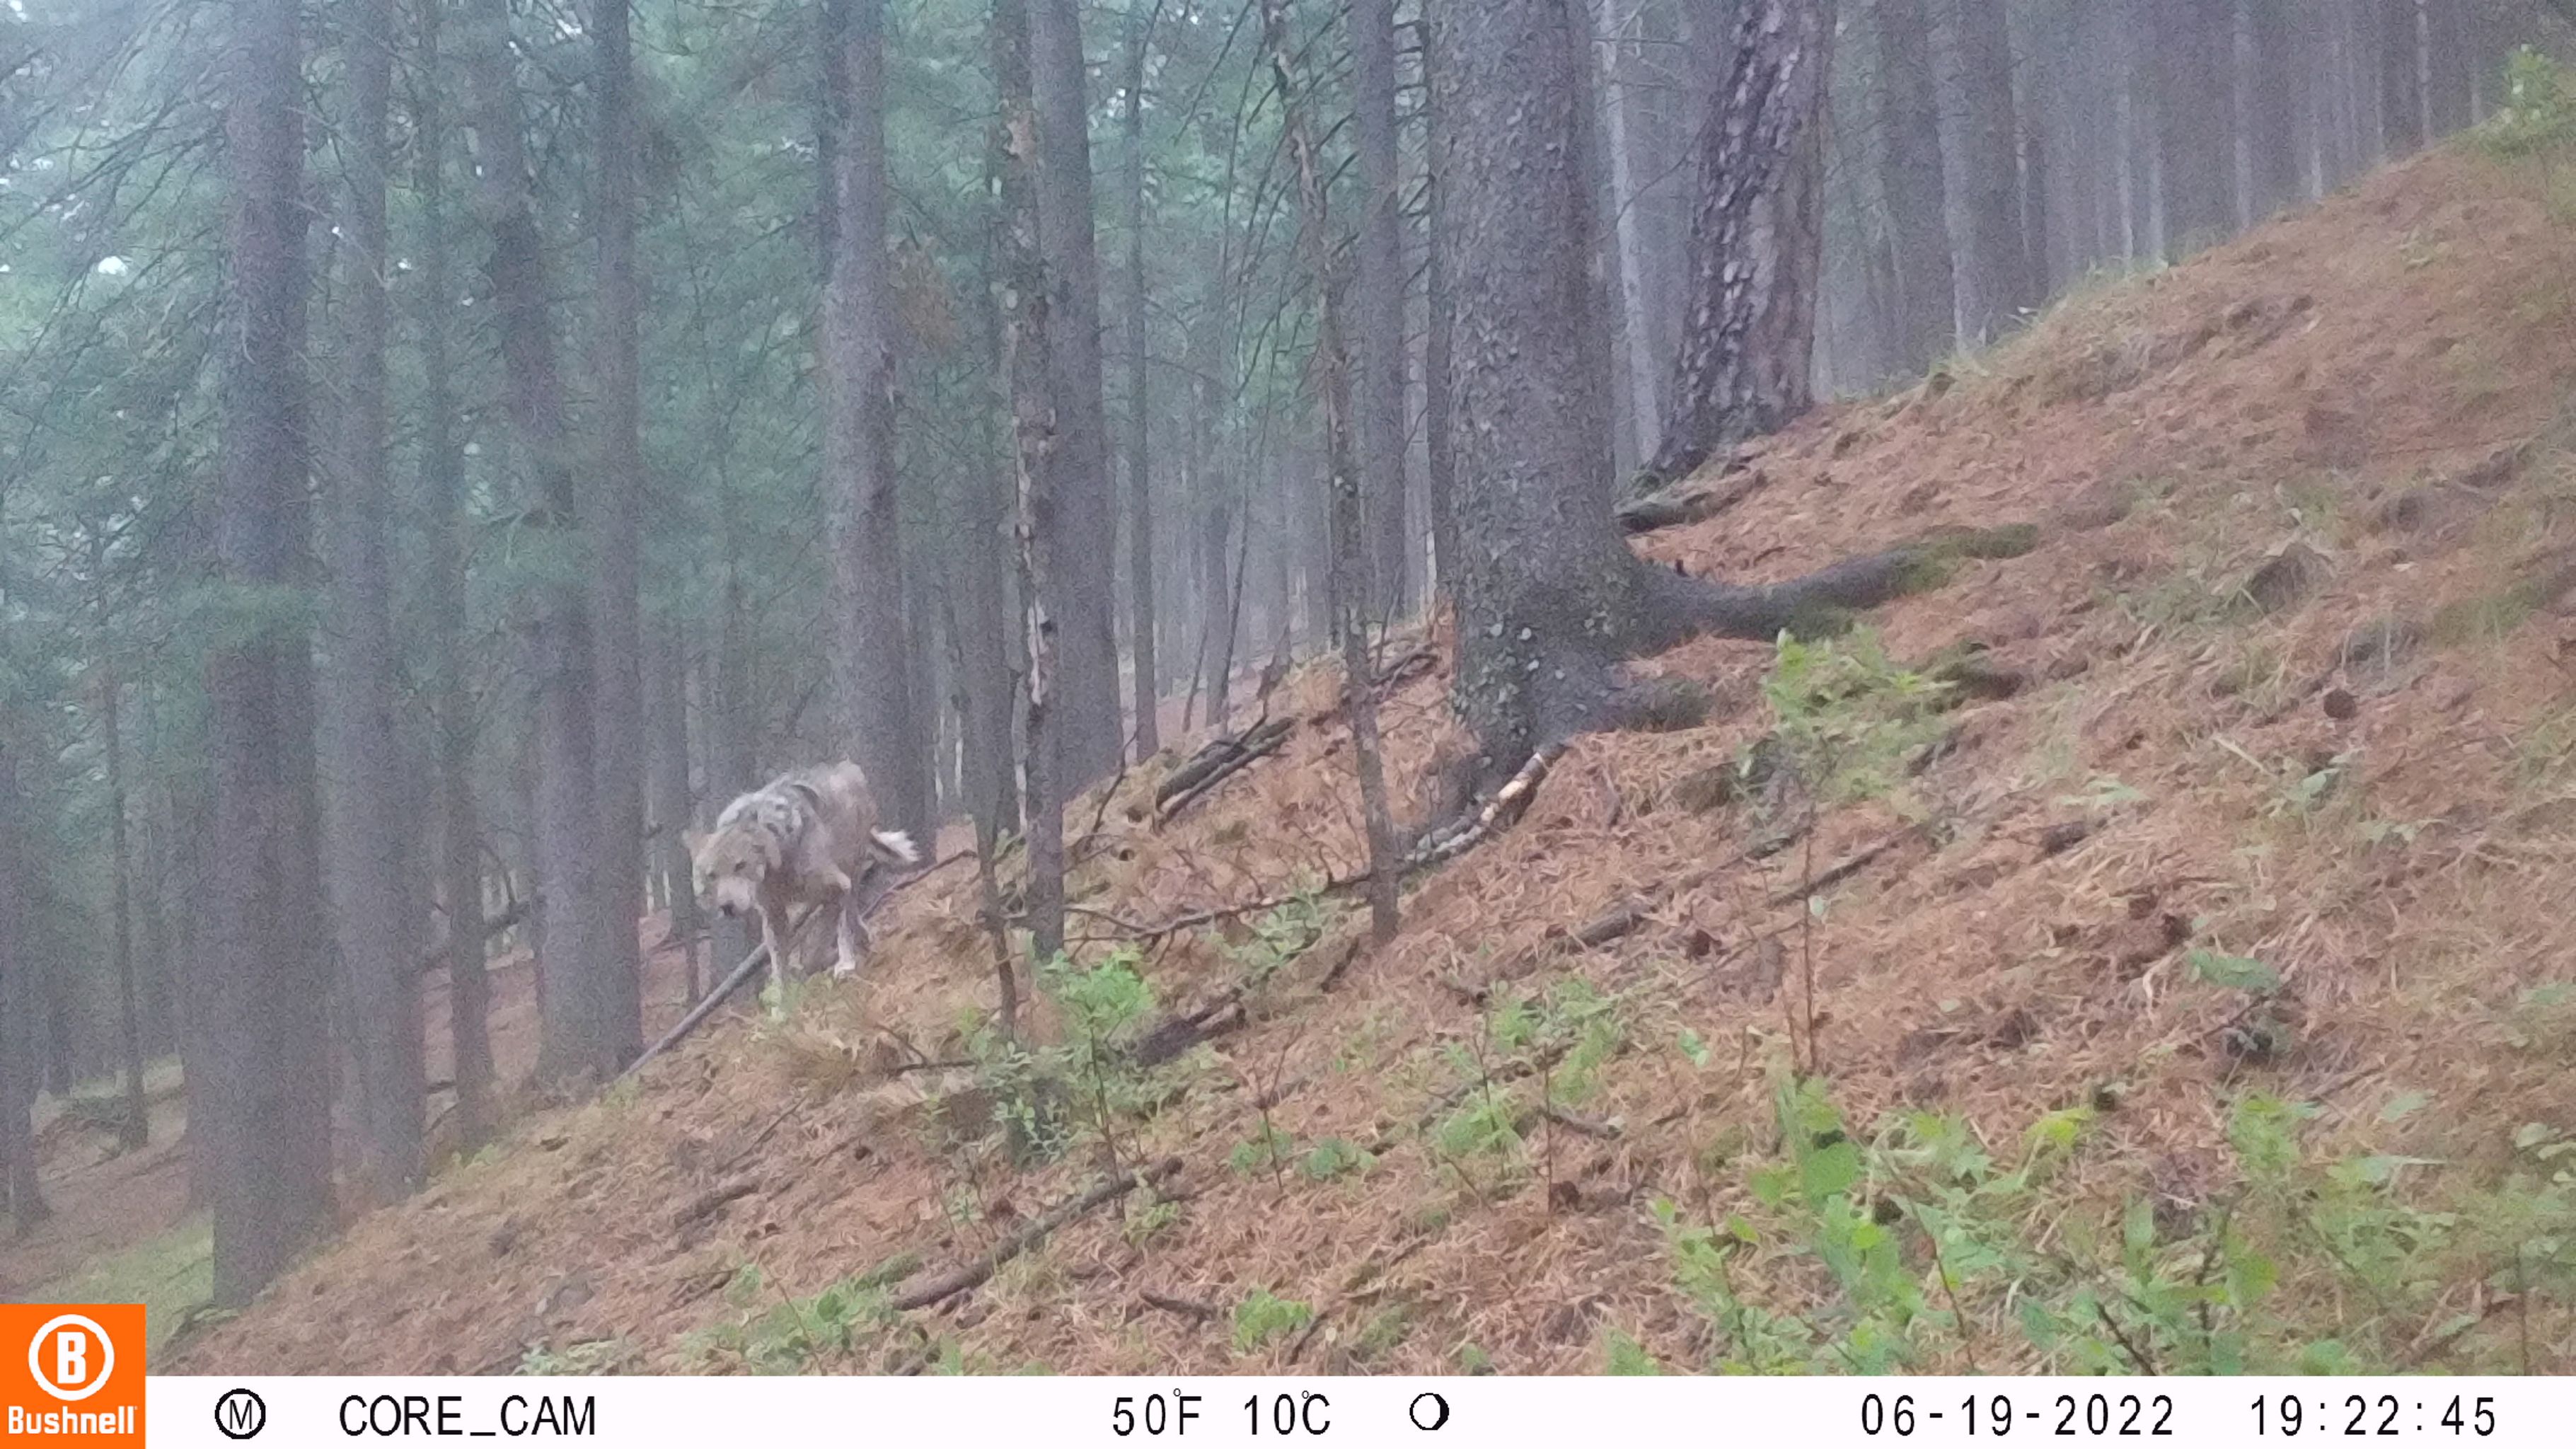 A wildlife camera image of a Mongolian wolf walking through a forest